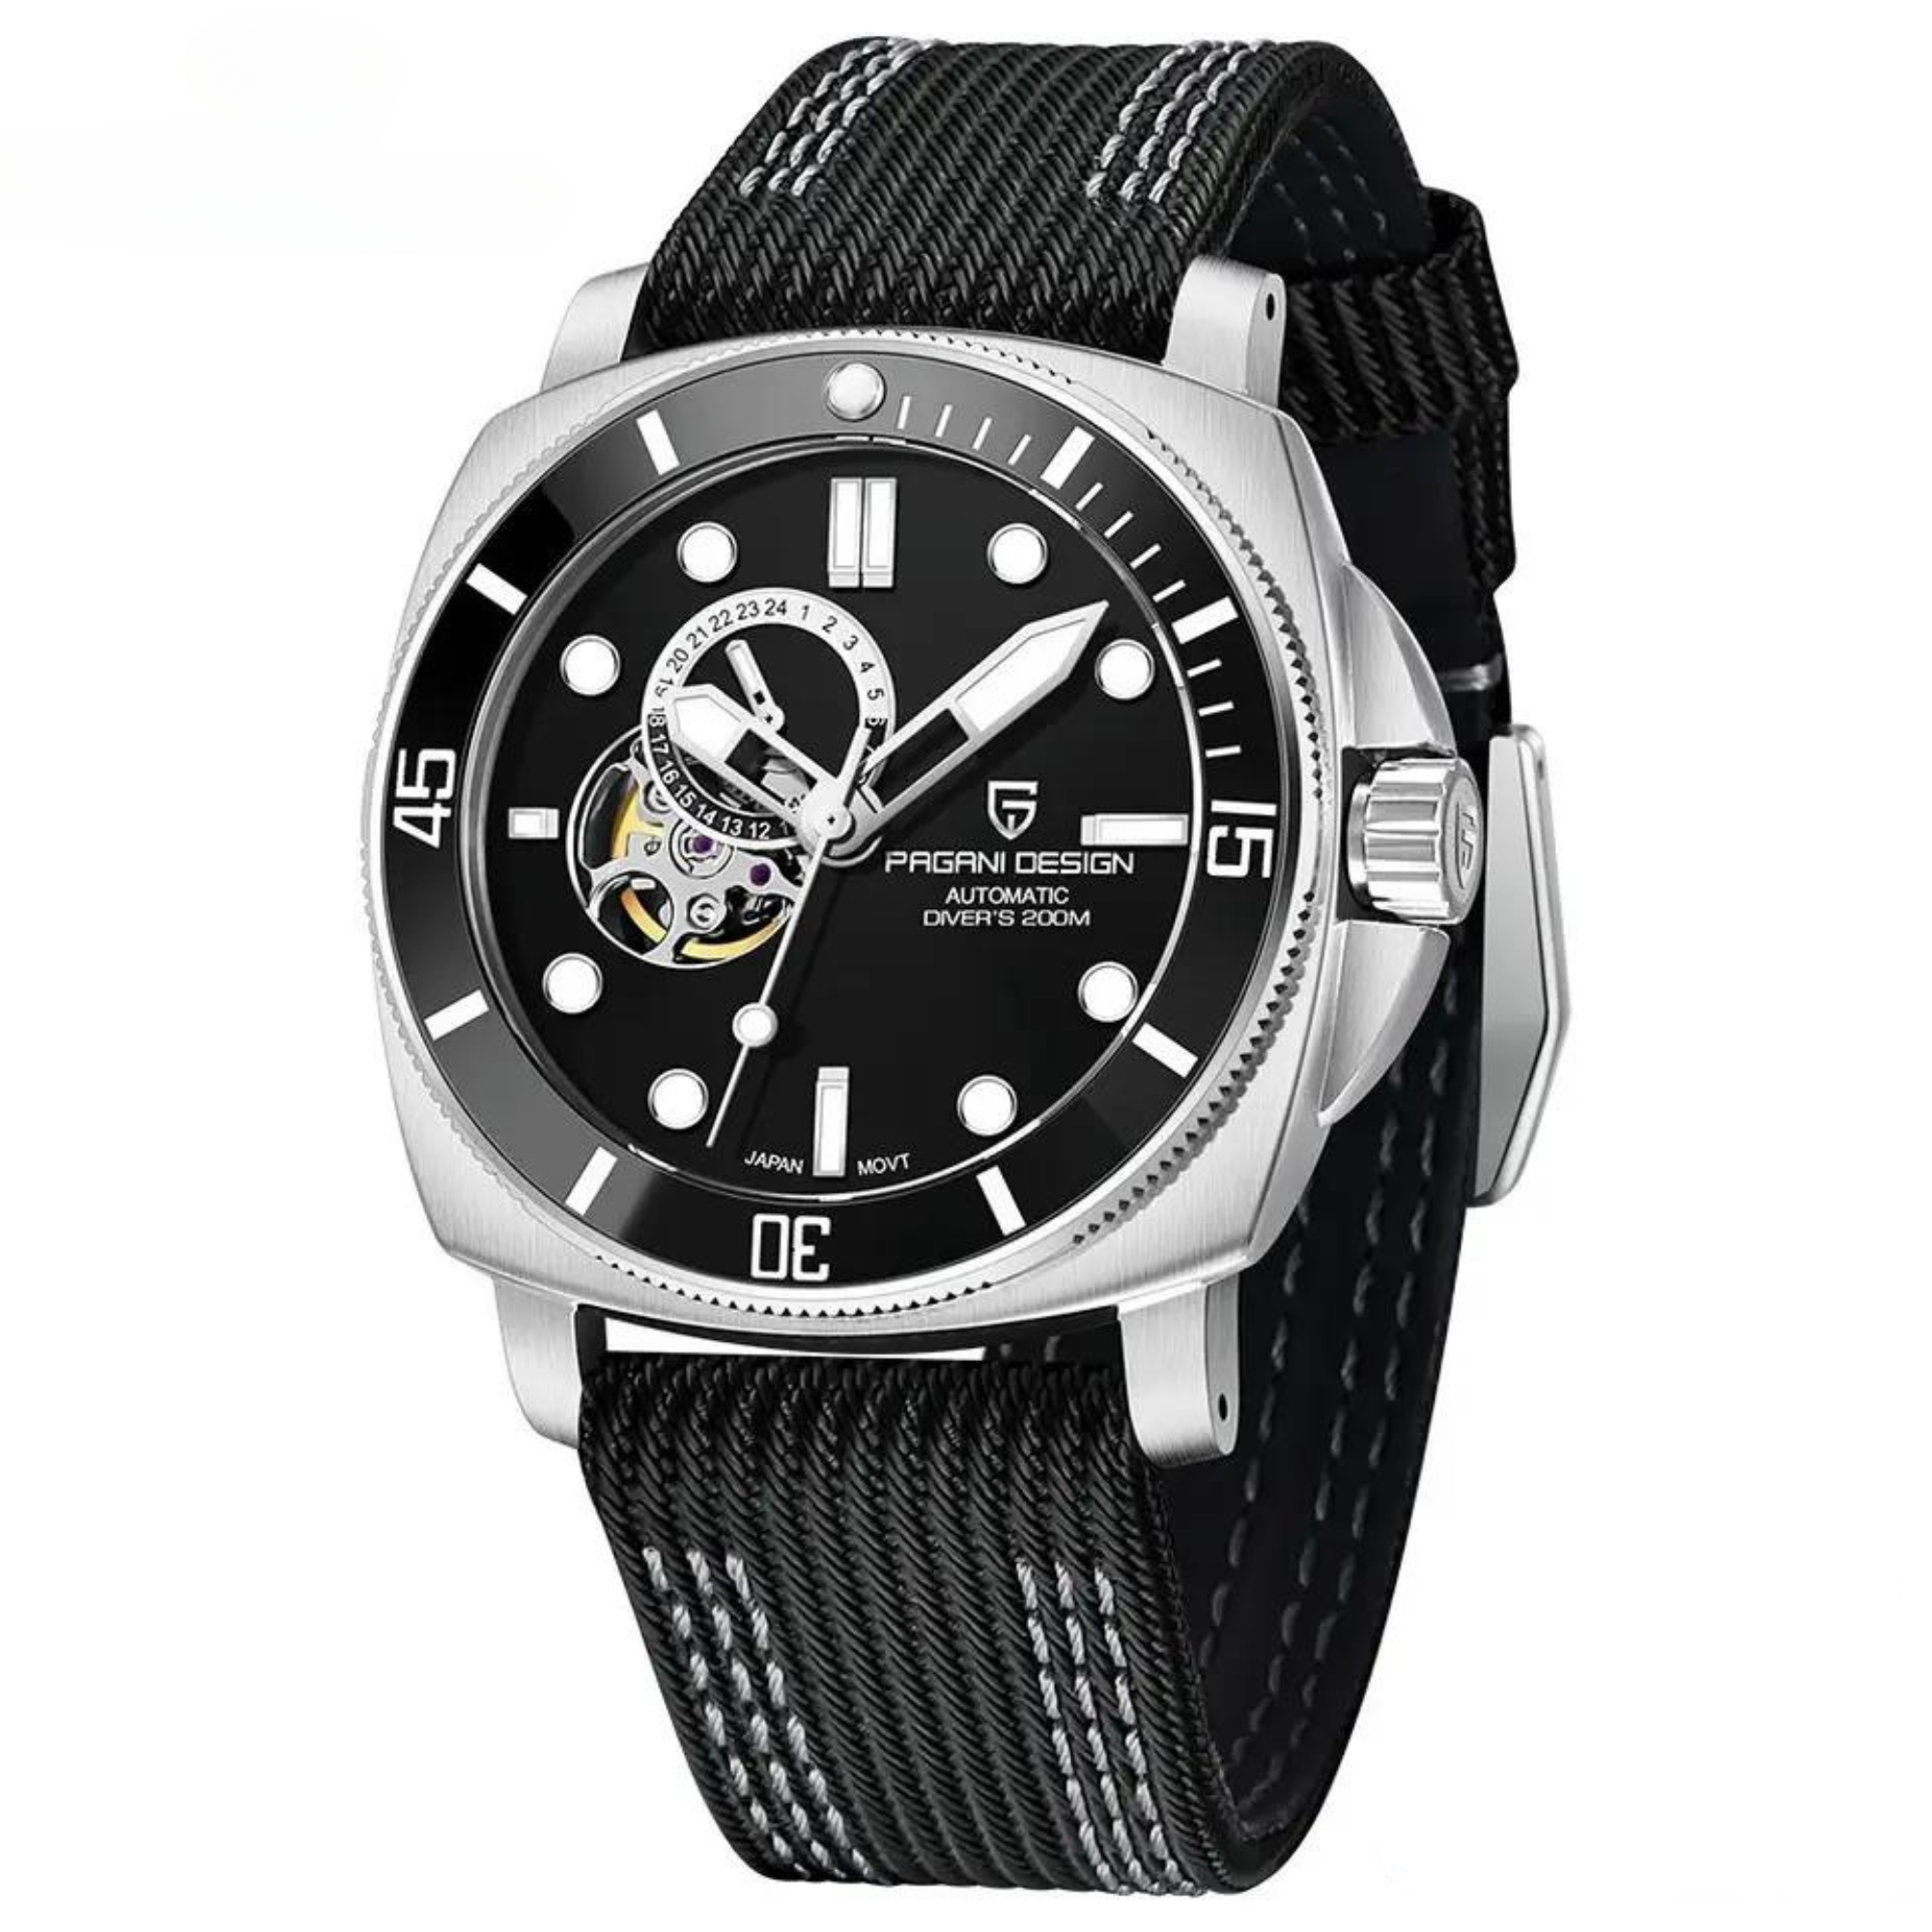 Pagani Design PD-1736 Mechanical Automatic Stainless Steel Men's 43MM Watch (Black Dial)